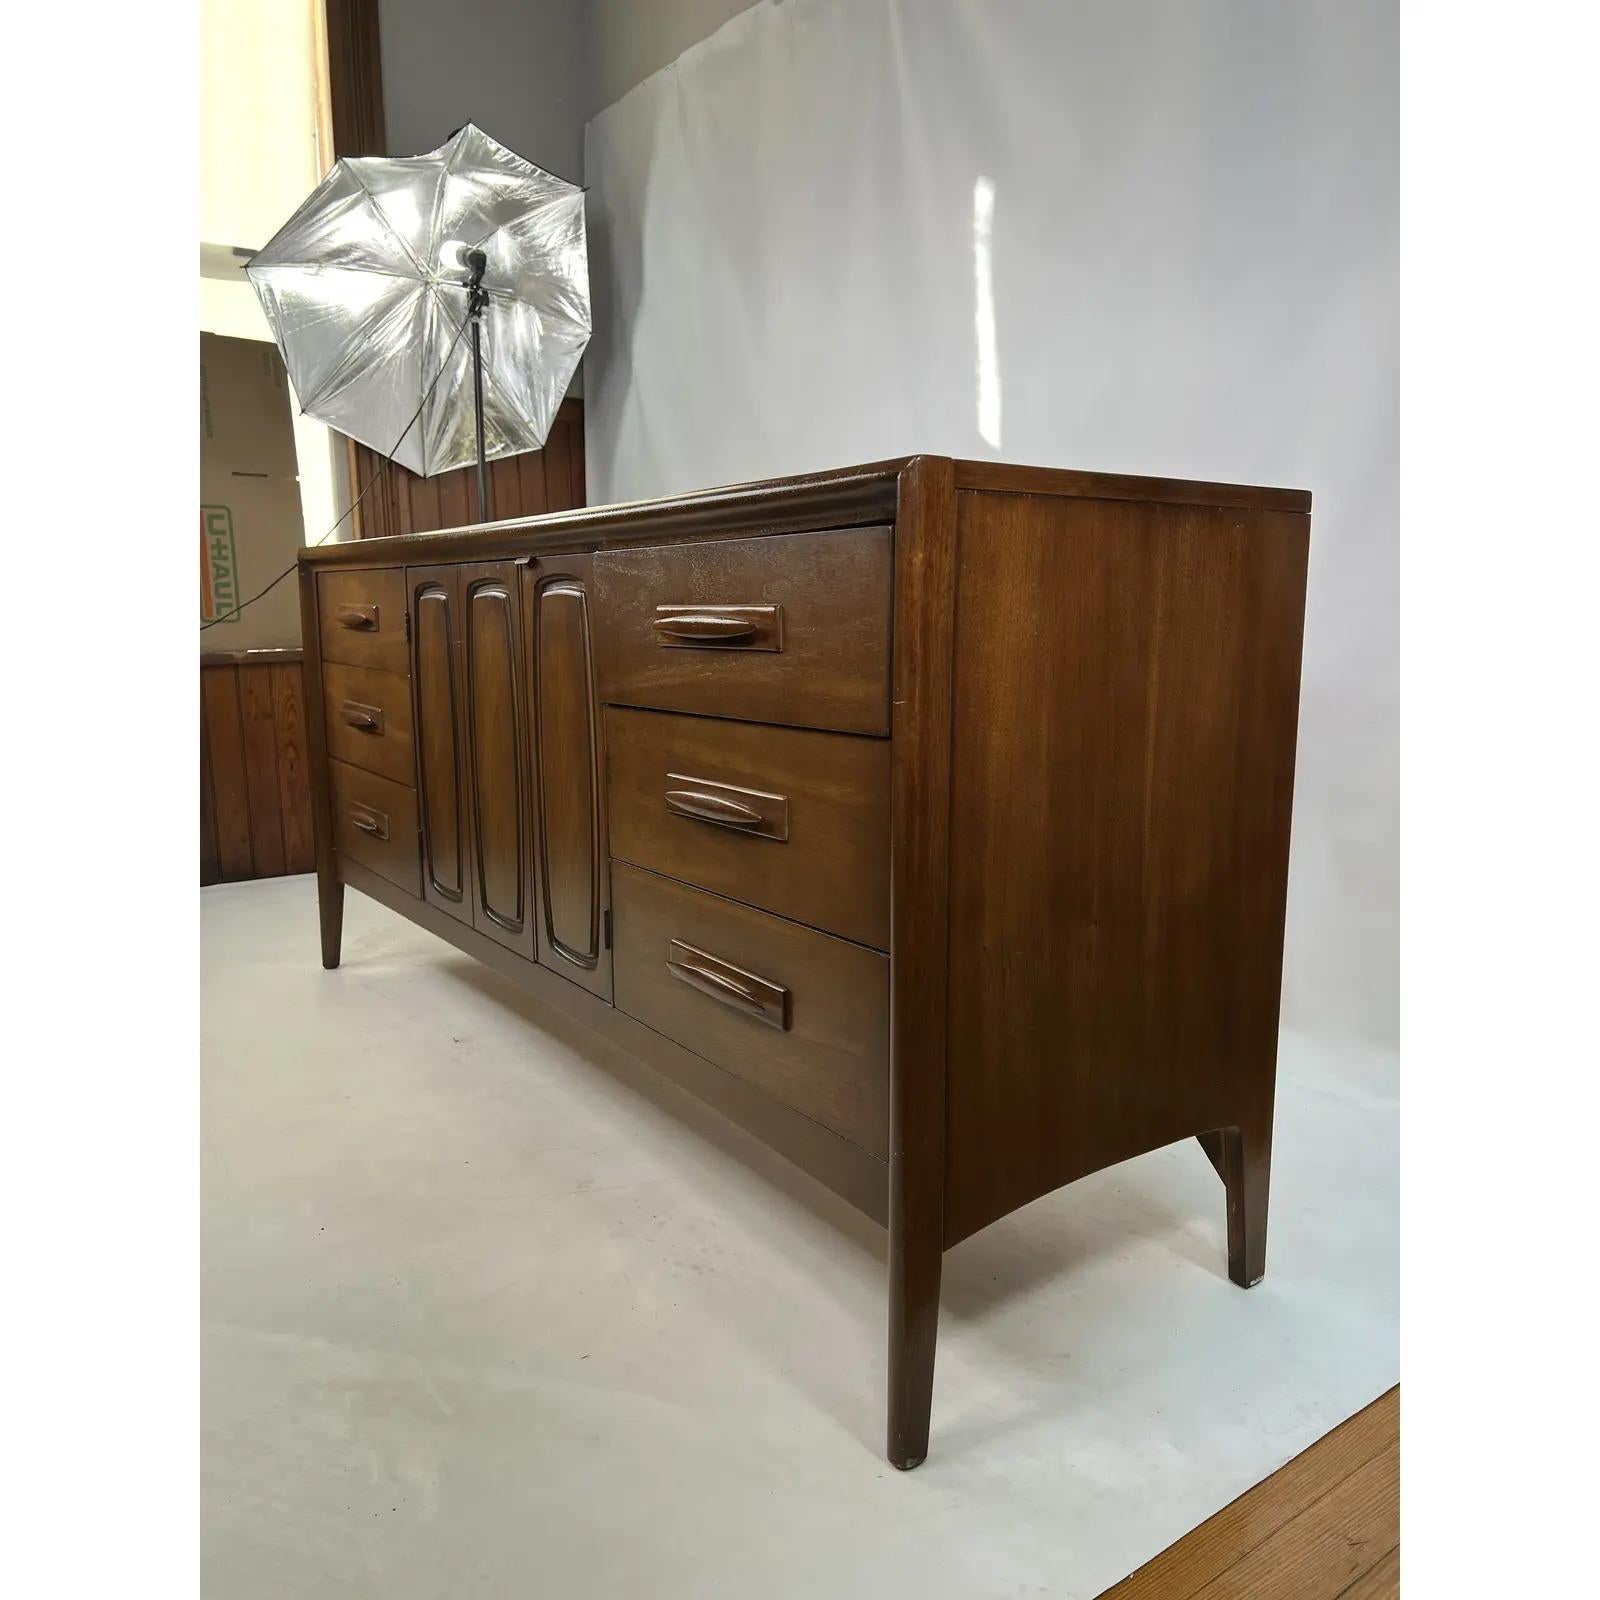 This 1950s credenza from the Emphasis series by Broyhill has a total of nine drawers. It was beautifully crafted and manufactured. It could also be used as a dresser if desired.